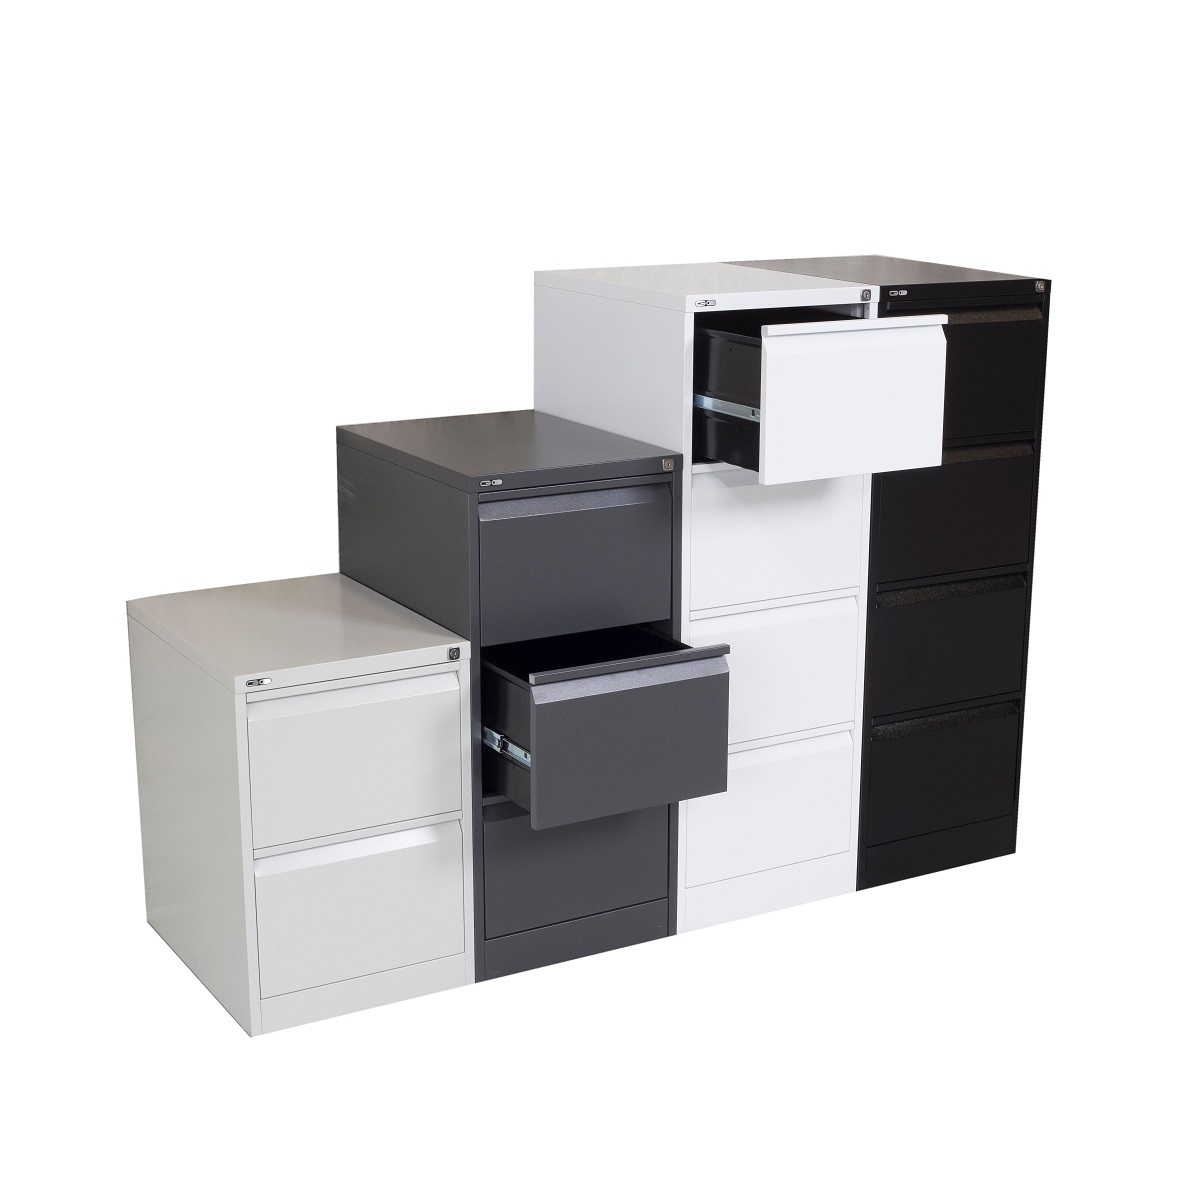 Go Vertical Filing Cabinets